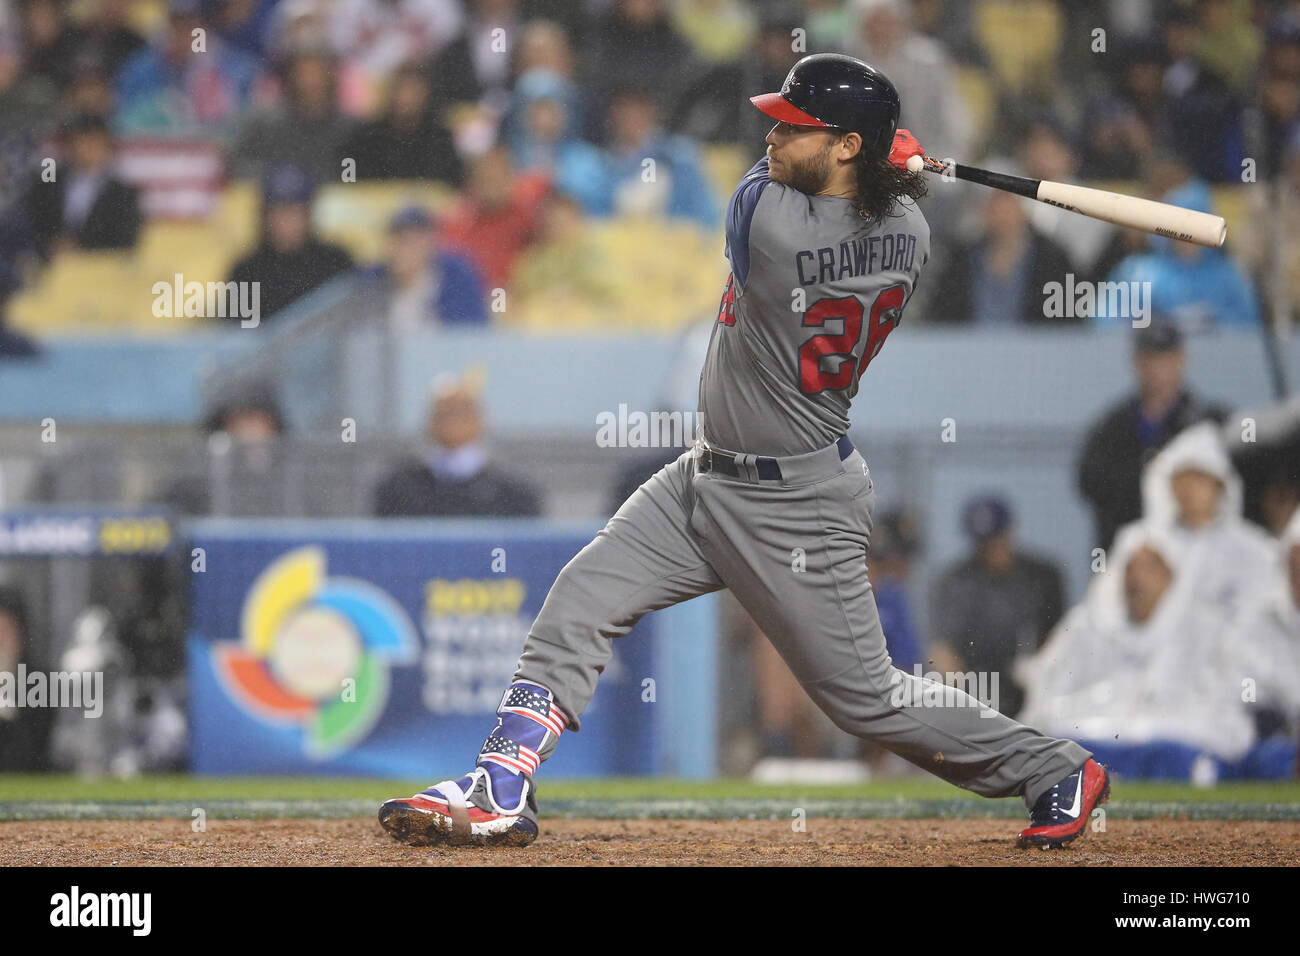 Los Angeles, CA, USA. 21st Mar, 2017. United States catcher Buster Posey #28 watches his shot to left field for a long single in the game between the the United States and Japan, World Baseball Classic Semi-Finals, Dodger Stadium in Los Angeles, CA. Peter Joneleit /CSM/Alamy Live News Stock Photo